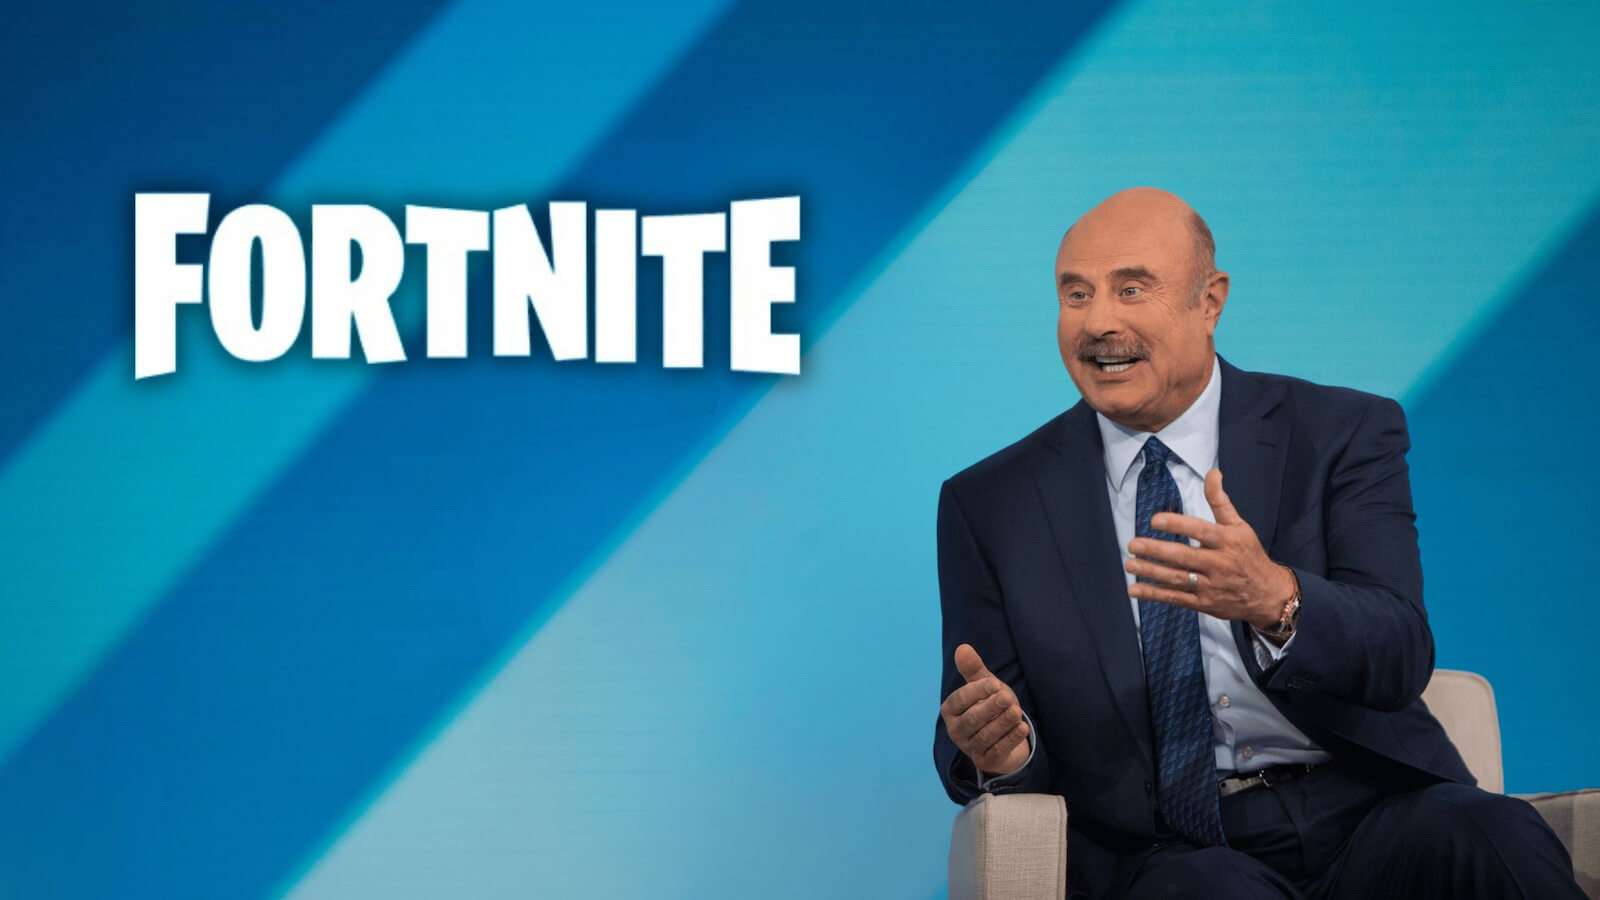 Fortnite Dr. Phil wants to be in the game